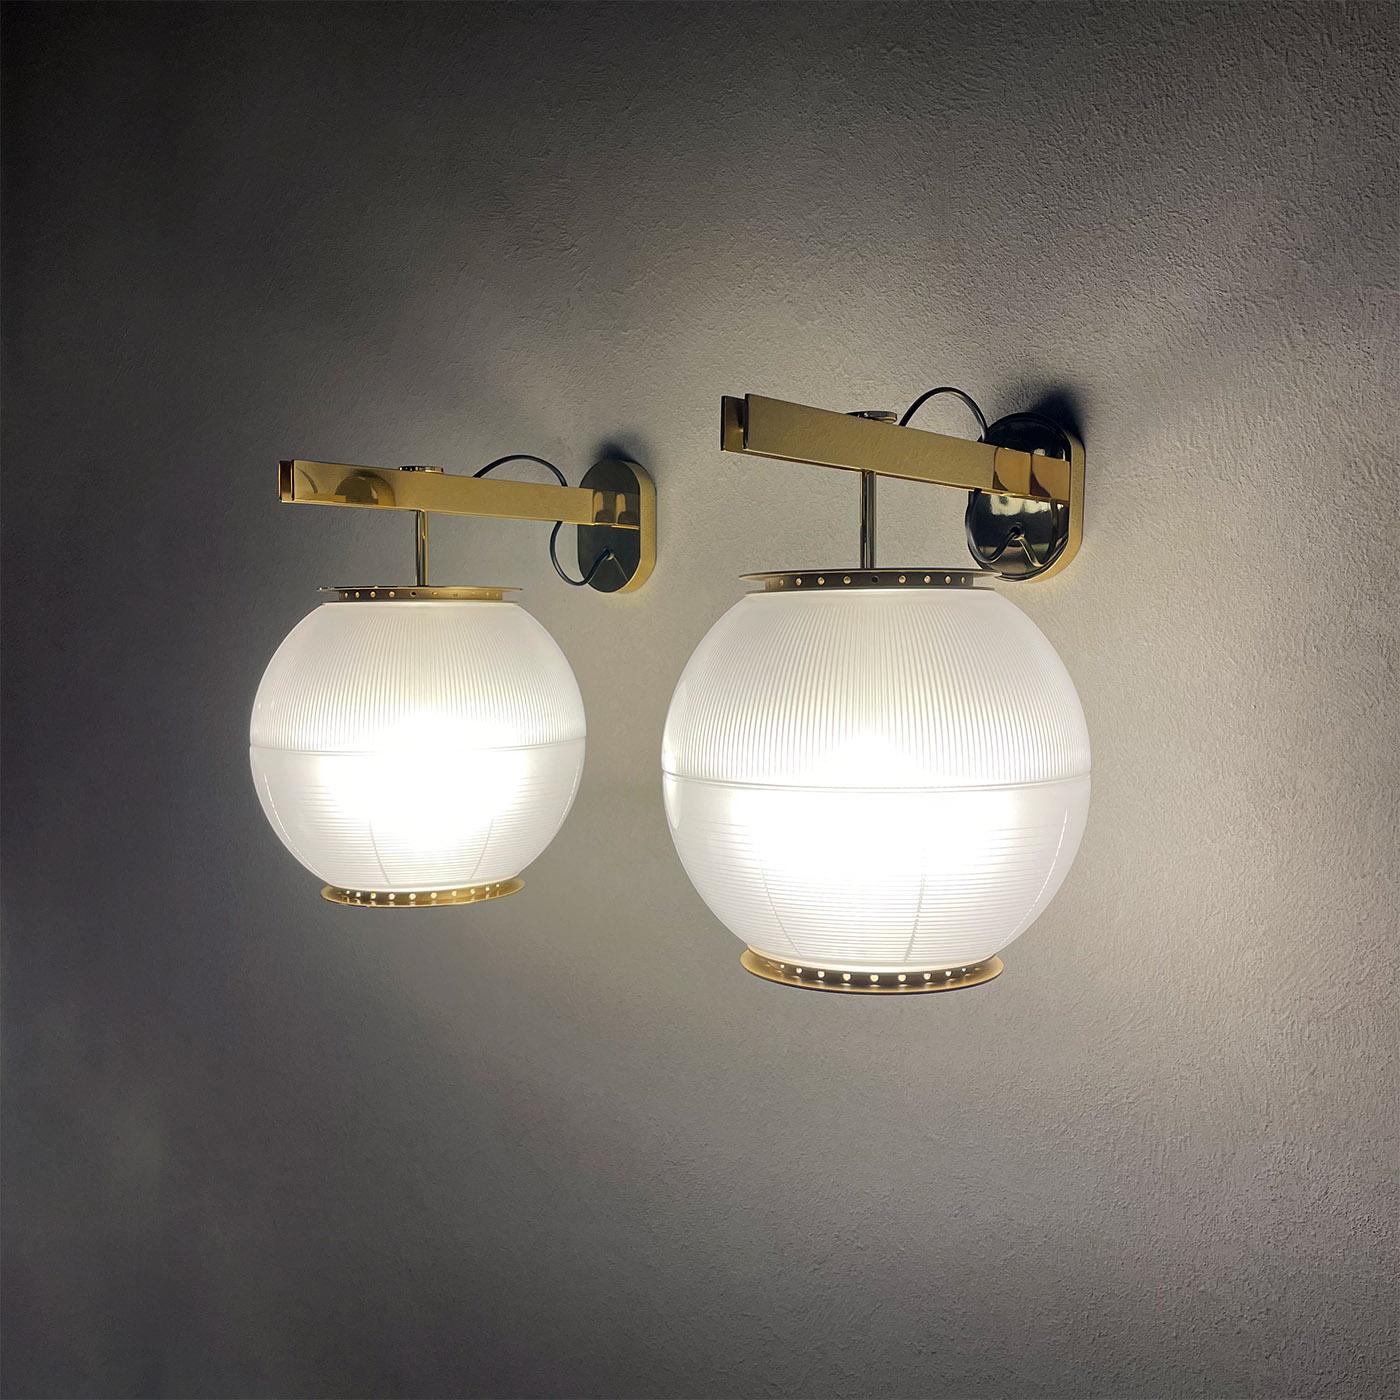 An exceptional display of craftsmanship made with minute attention to detail, this sconce belongs to the Doppio Vetro series of lighting fixtures designed by Ignazio Gardella. It is distinguished by two semi-spherical shades in printed glass,